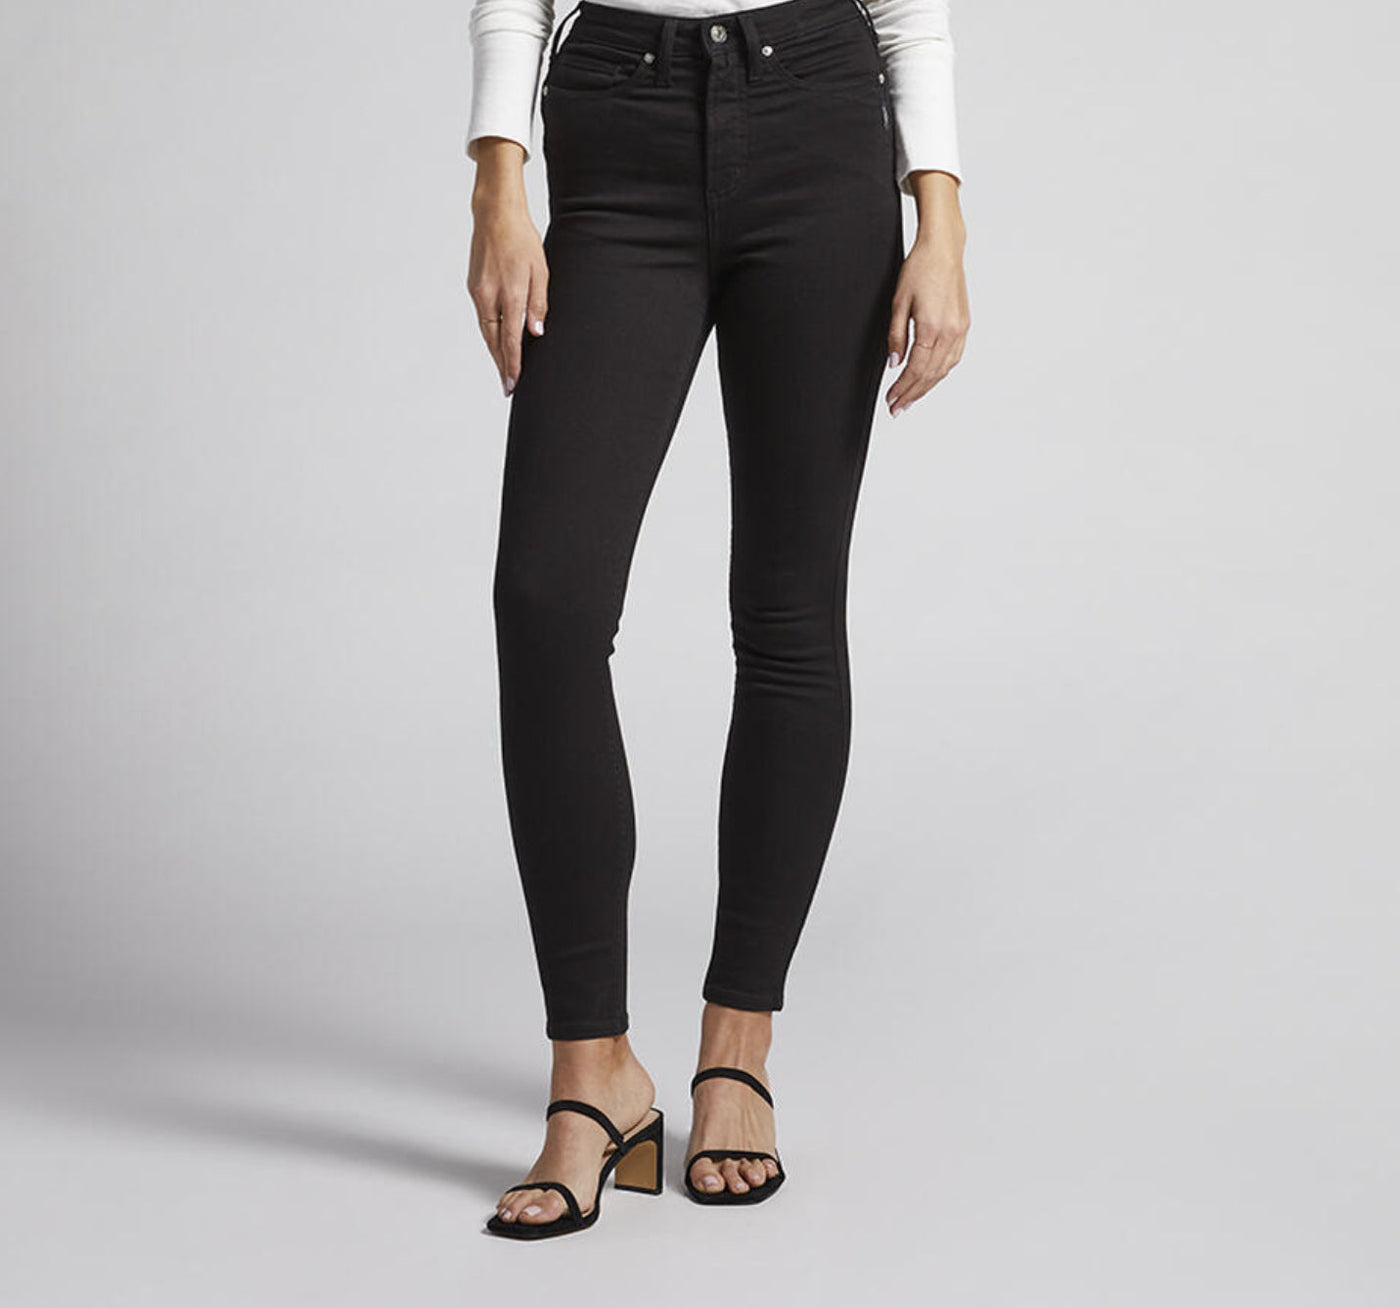 Silver Jeans - Infinite Fit High - Black - XSMALL